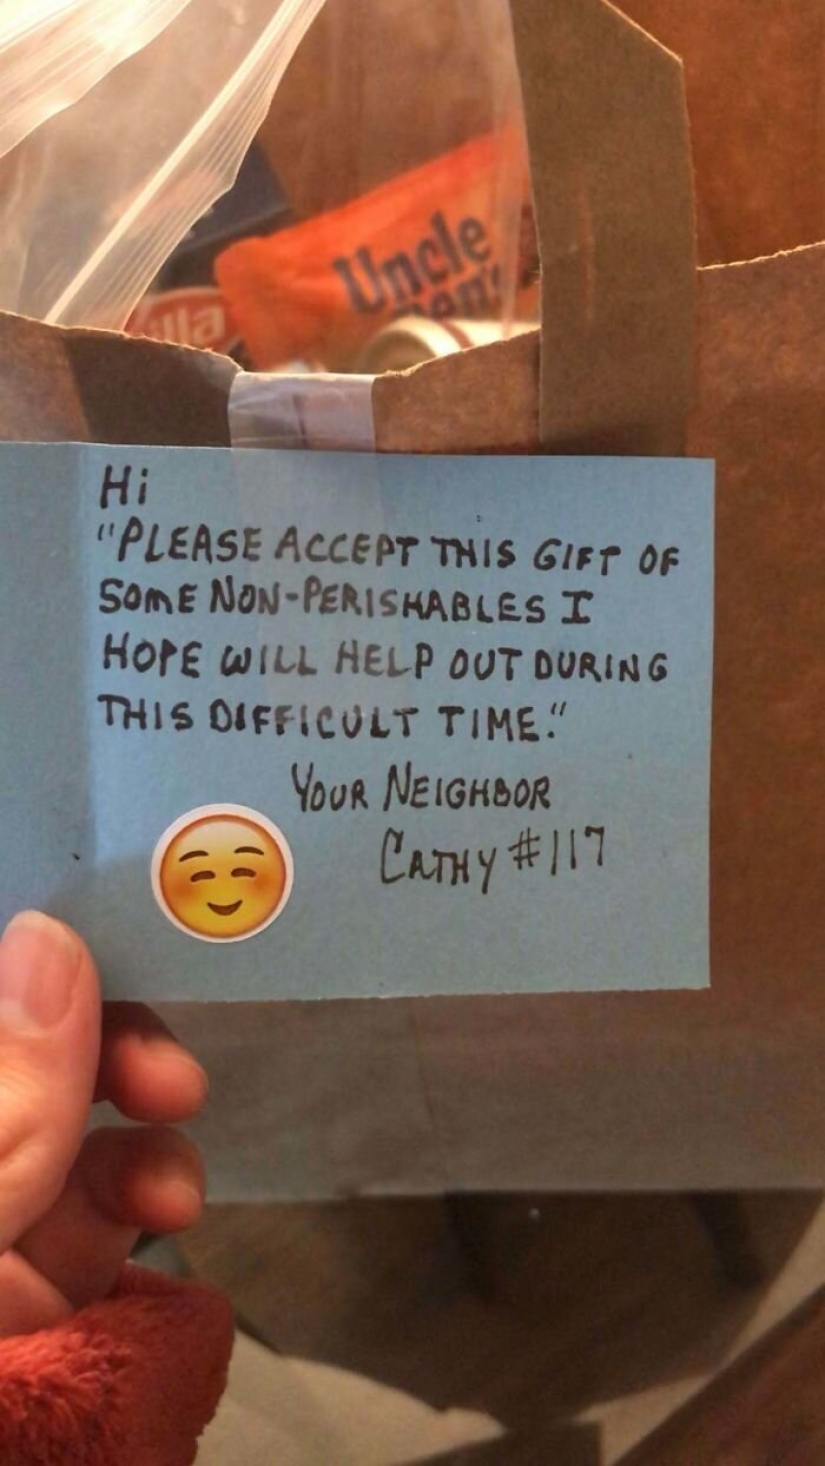 25 evidence that the world is not deprived of kindness in a pandemic